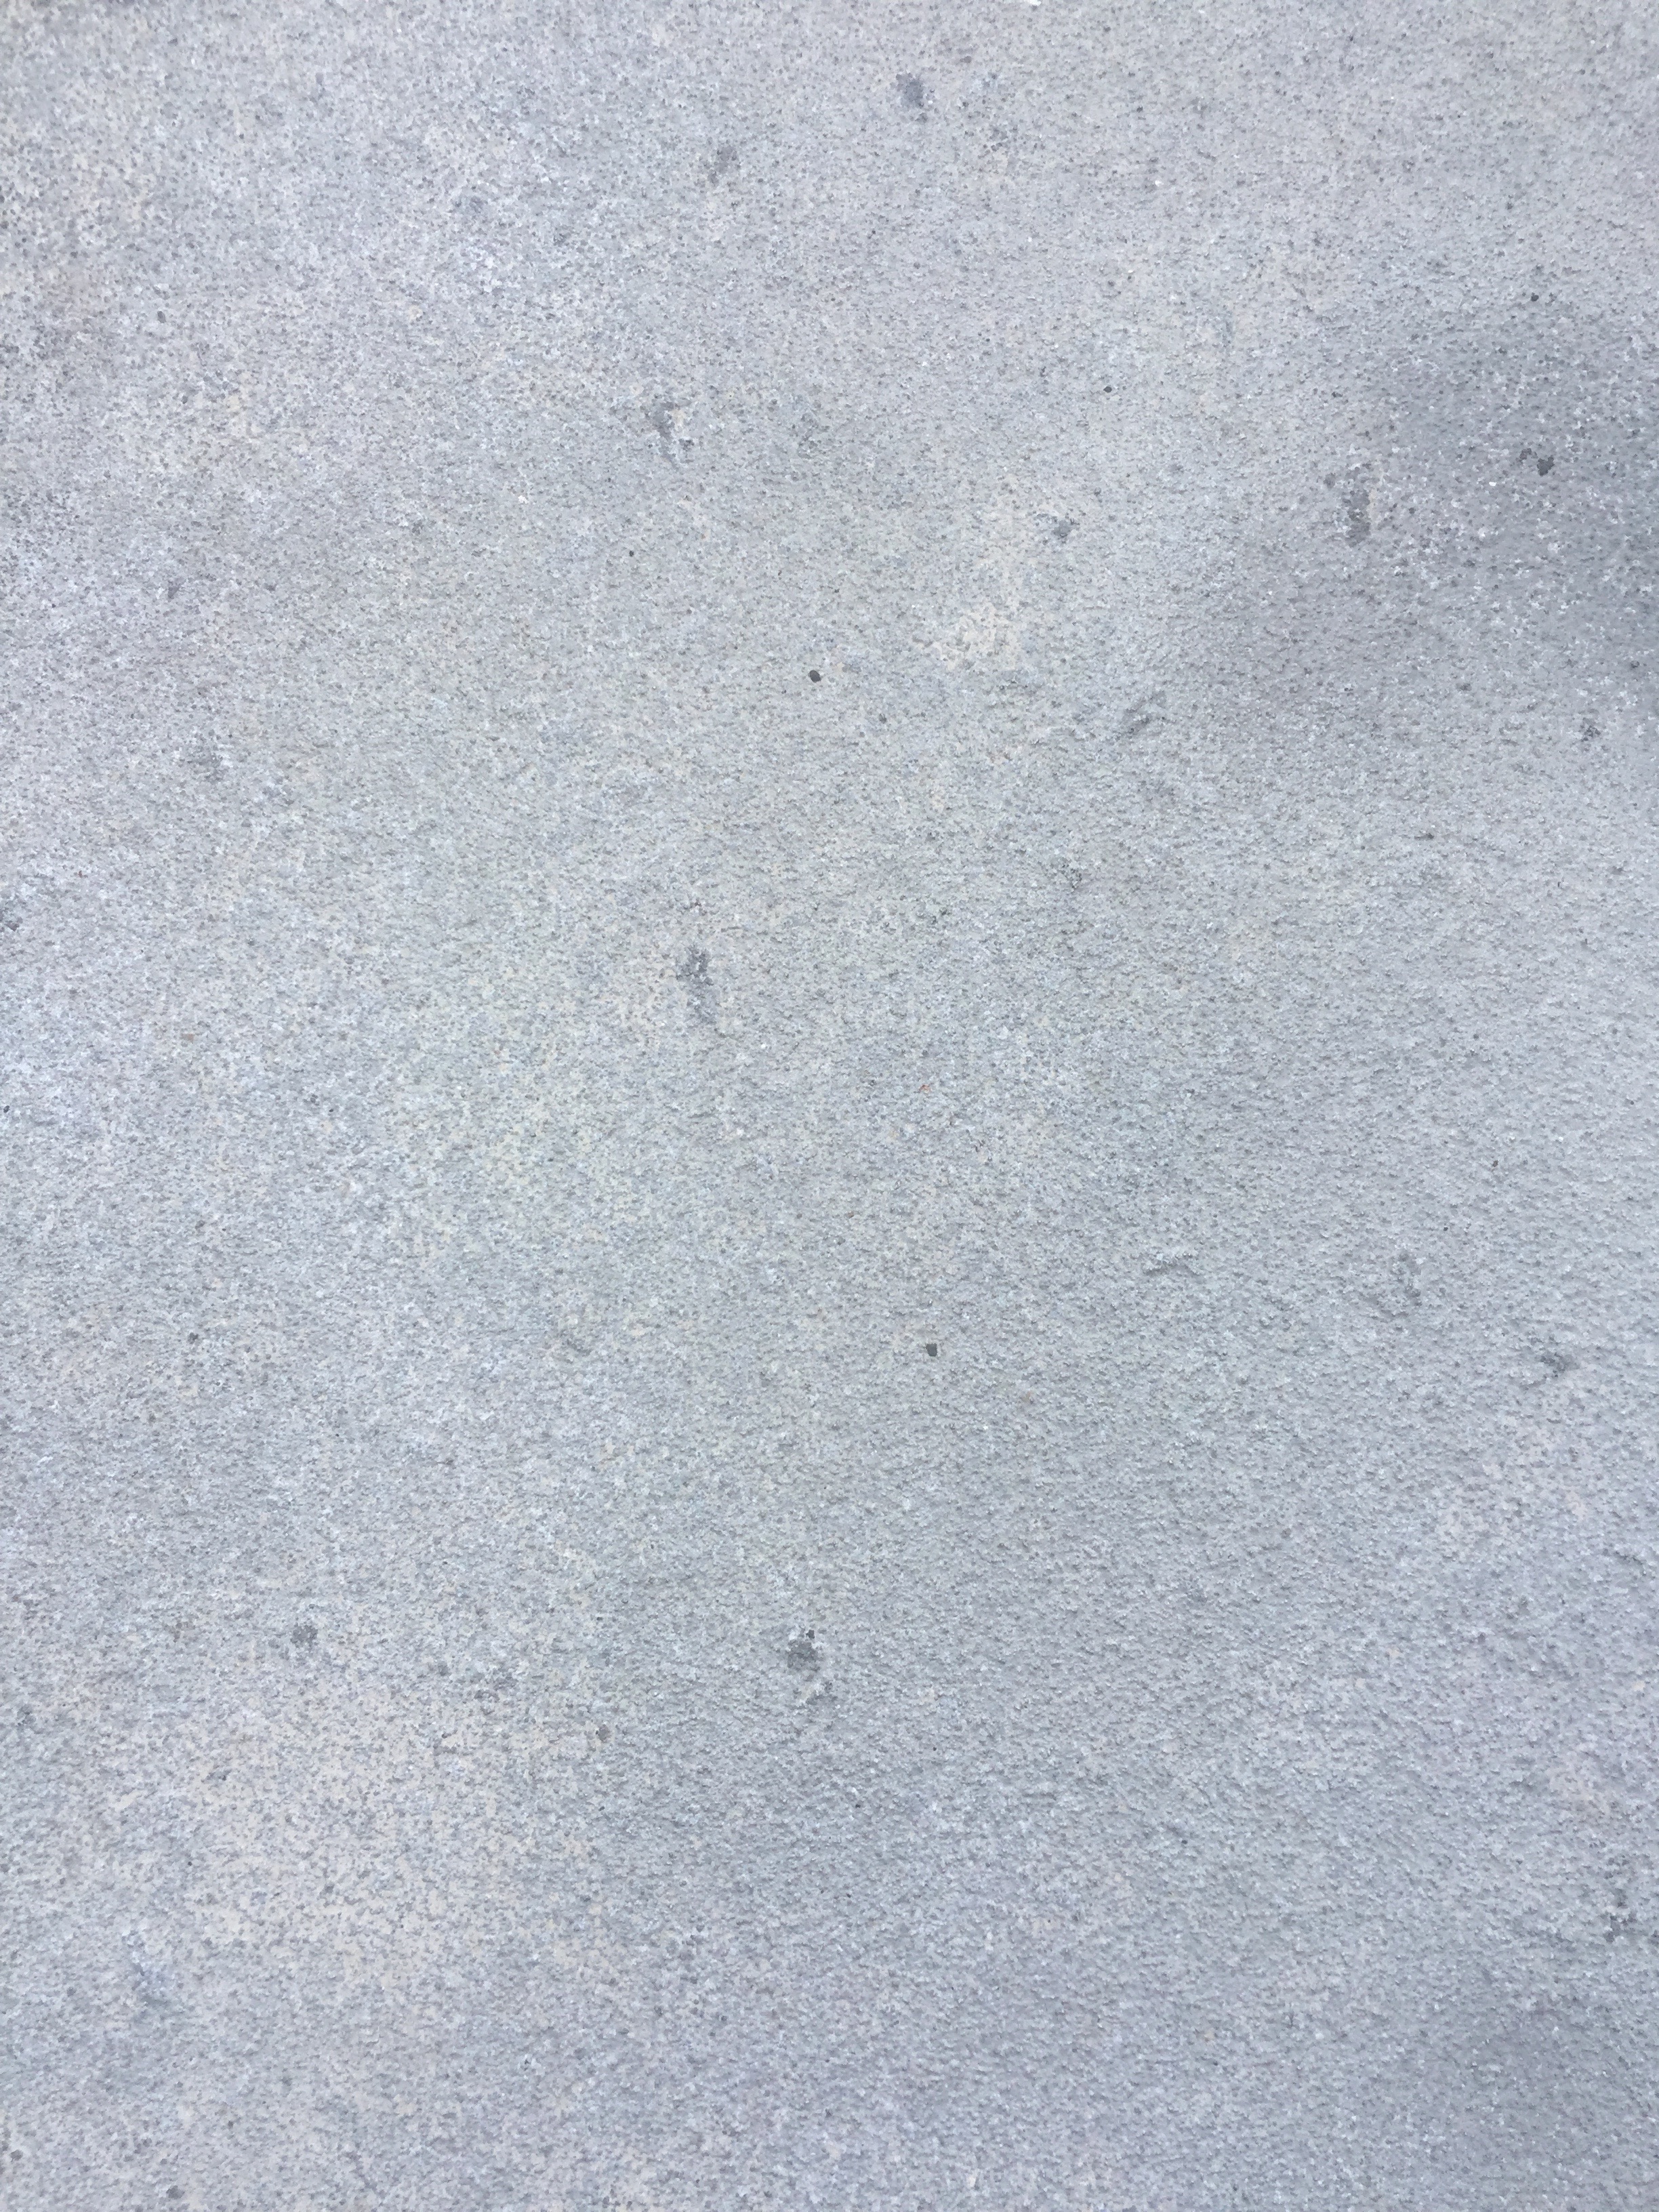 Light blue concrete wall with nice rough texture